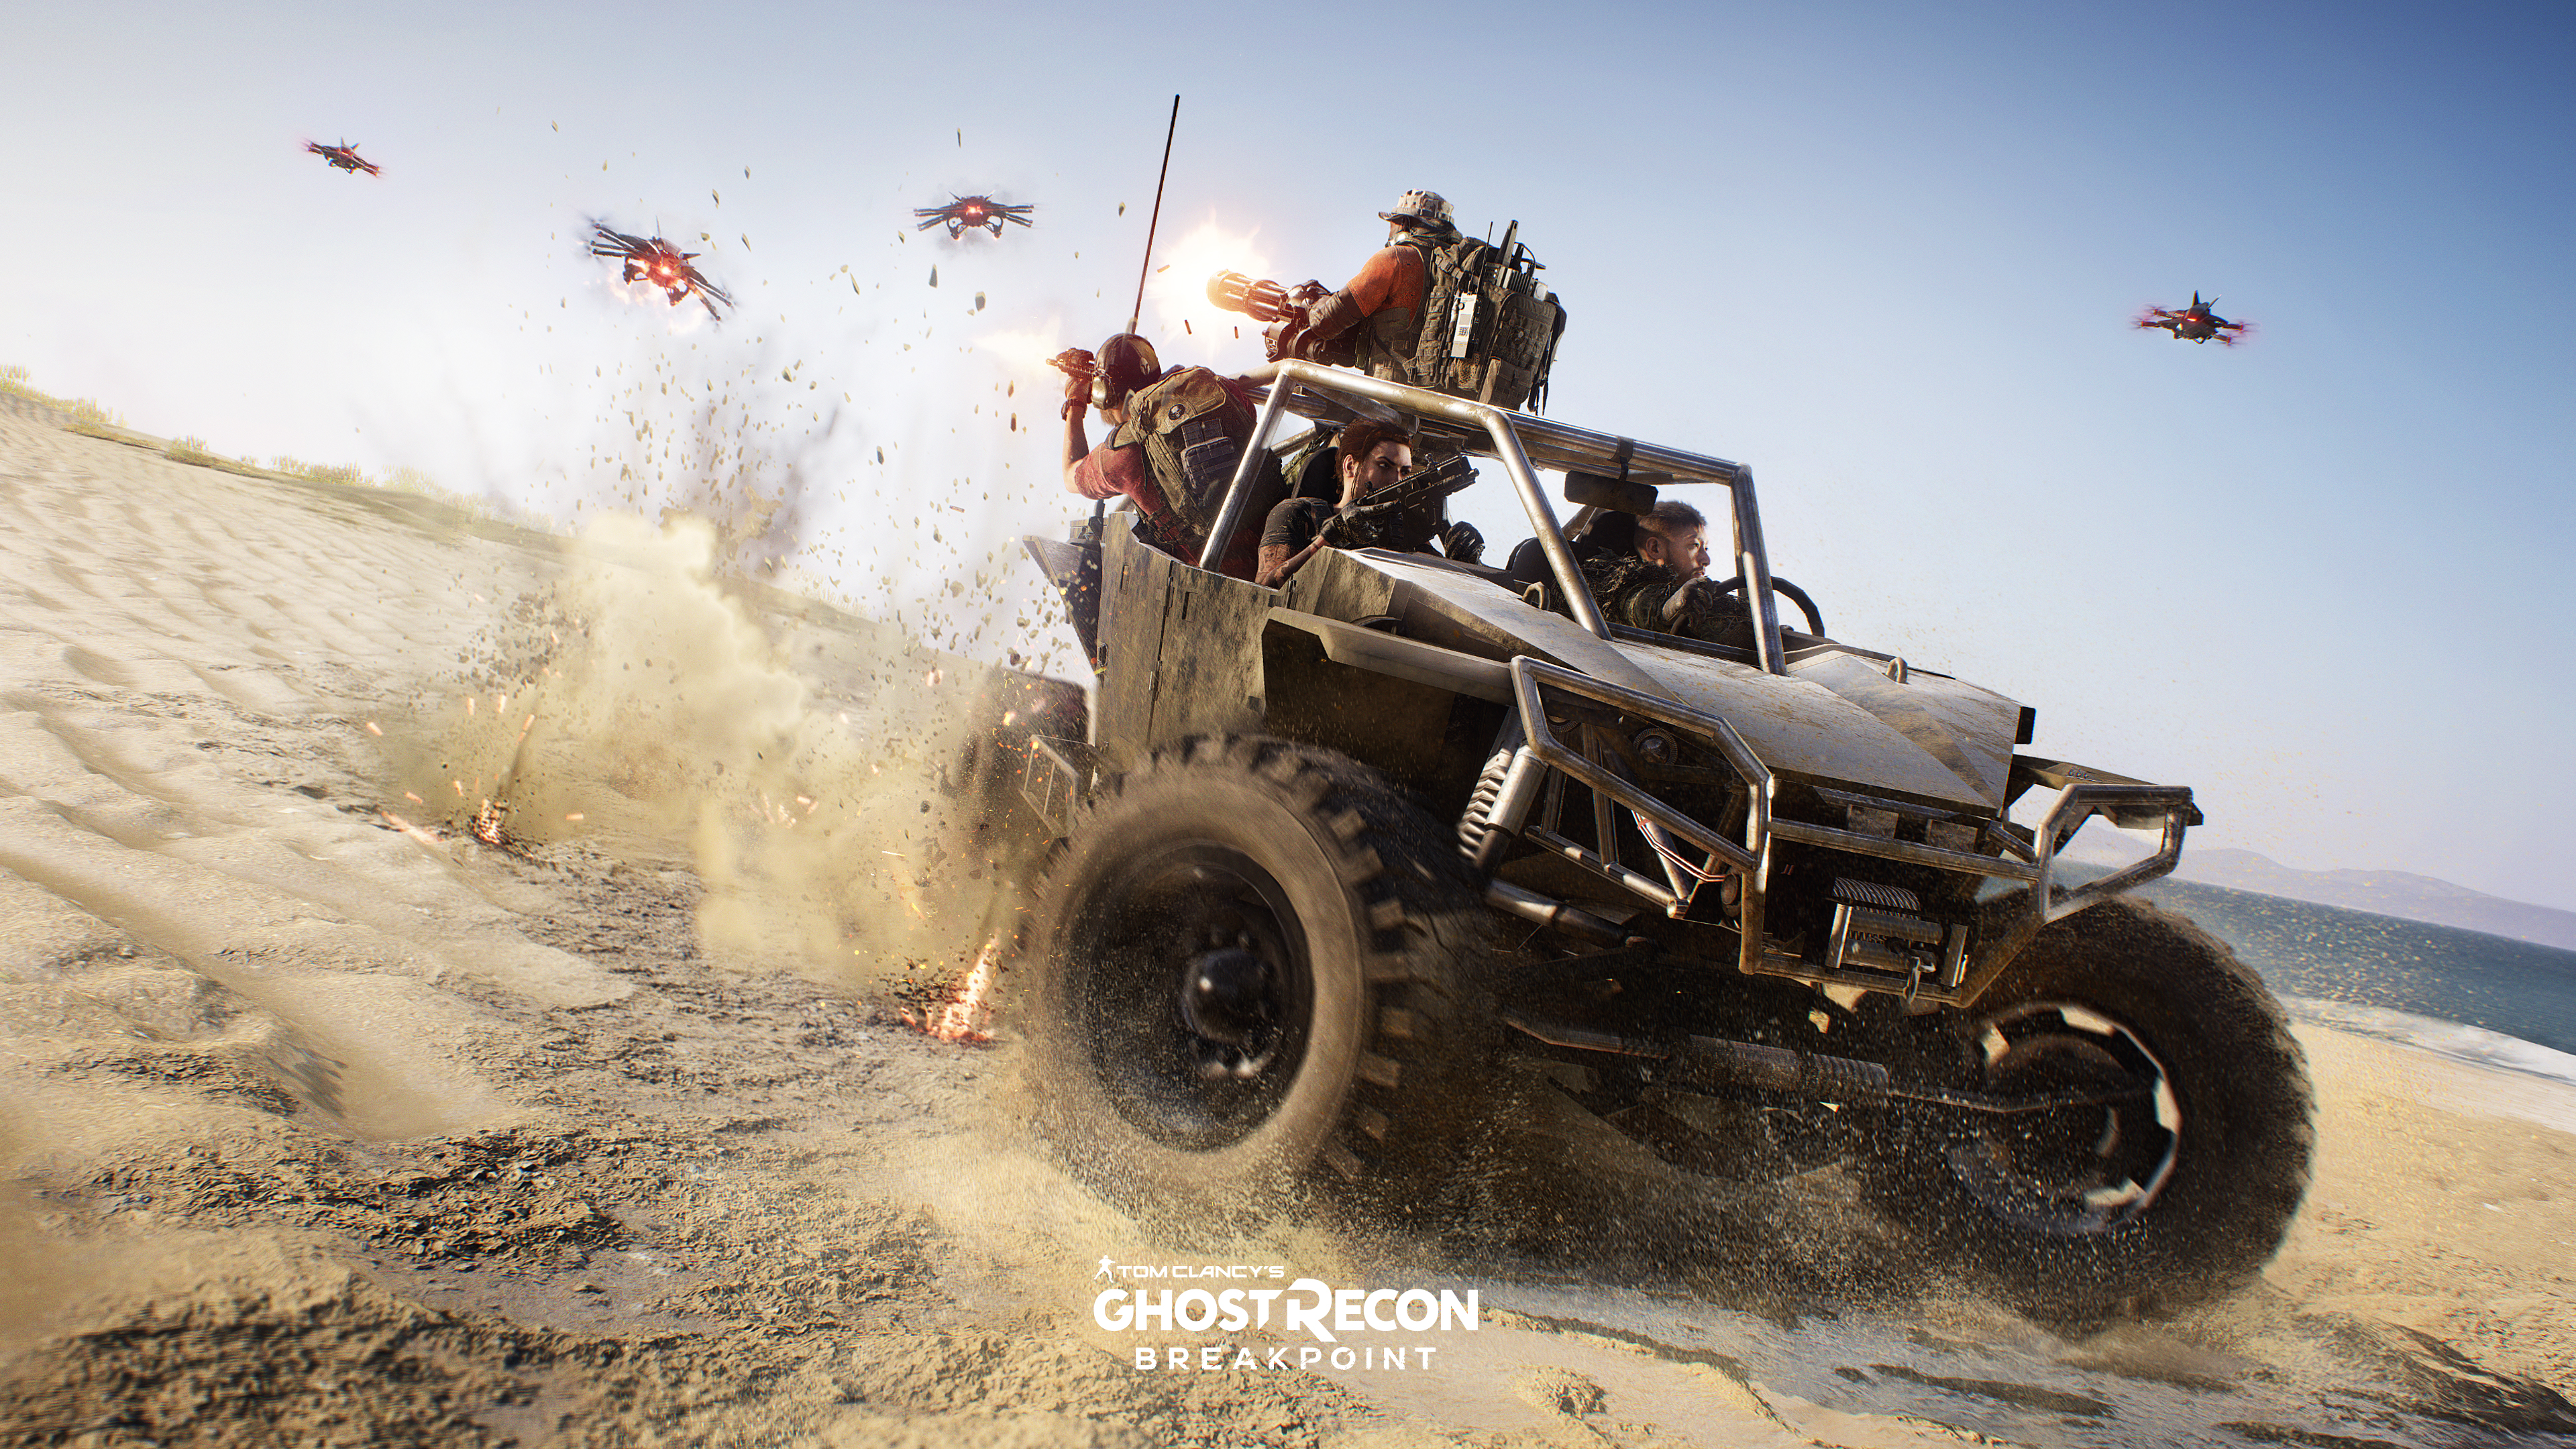 video game, tom clancy's ghost recon breakpoint, beach, dune buggy, gun, tom clancy's